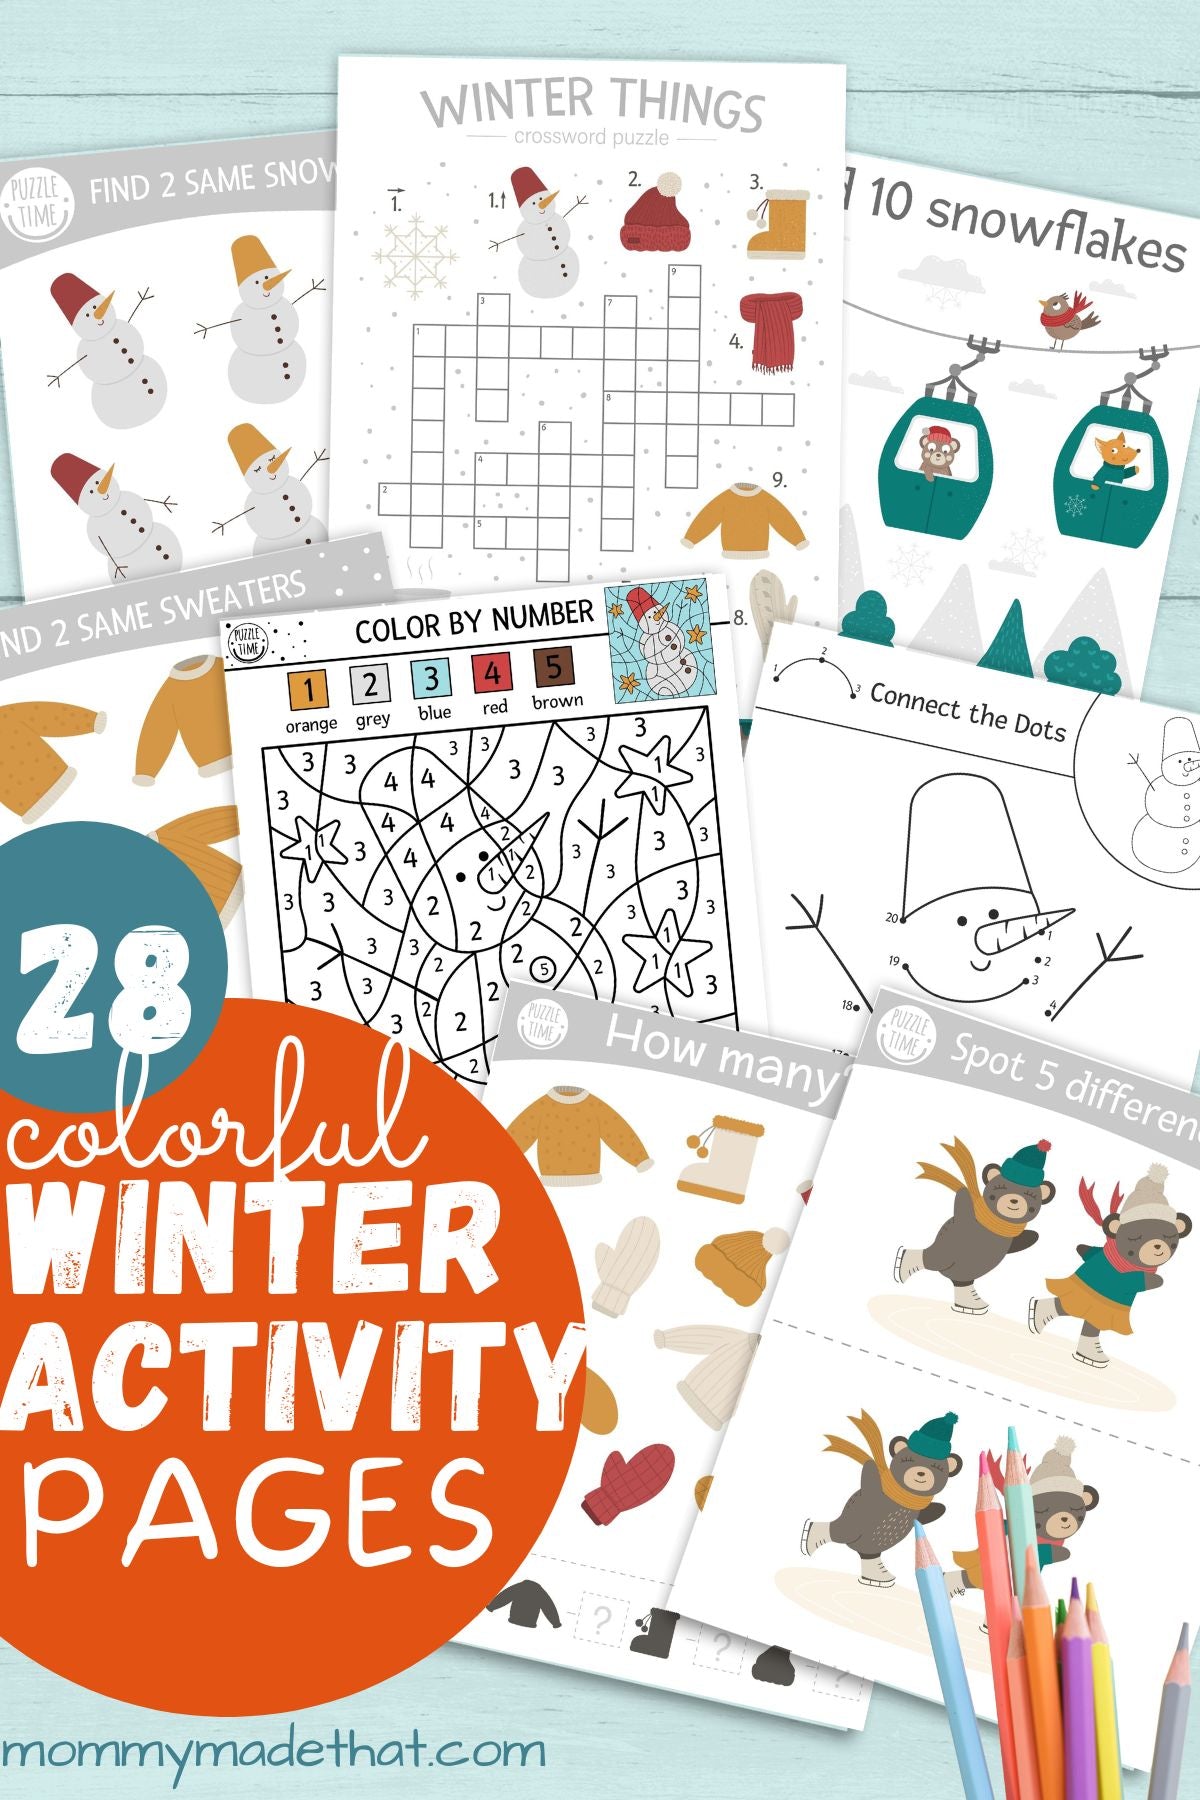 Winter Printable Games and Activities